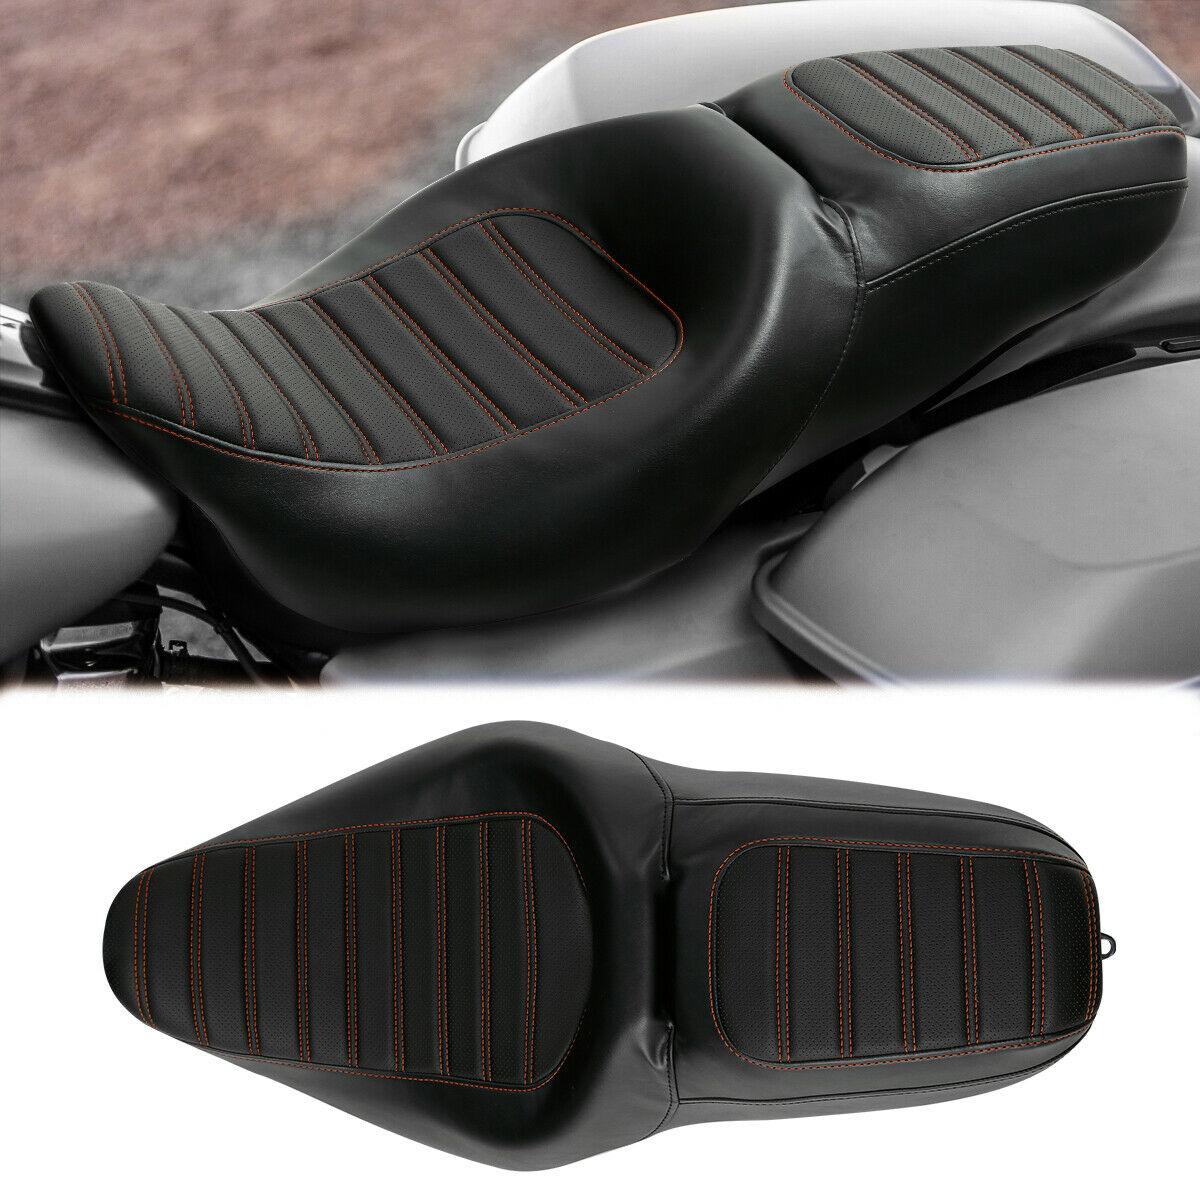 Driver Passenger Seat Fit For Harley Touring Road King Street Electra Glide 09+ - Moto Life Products